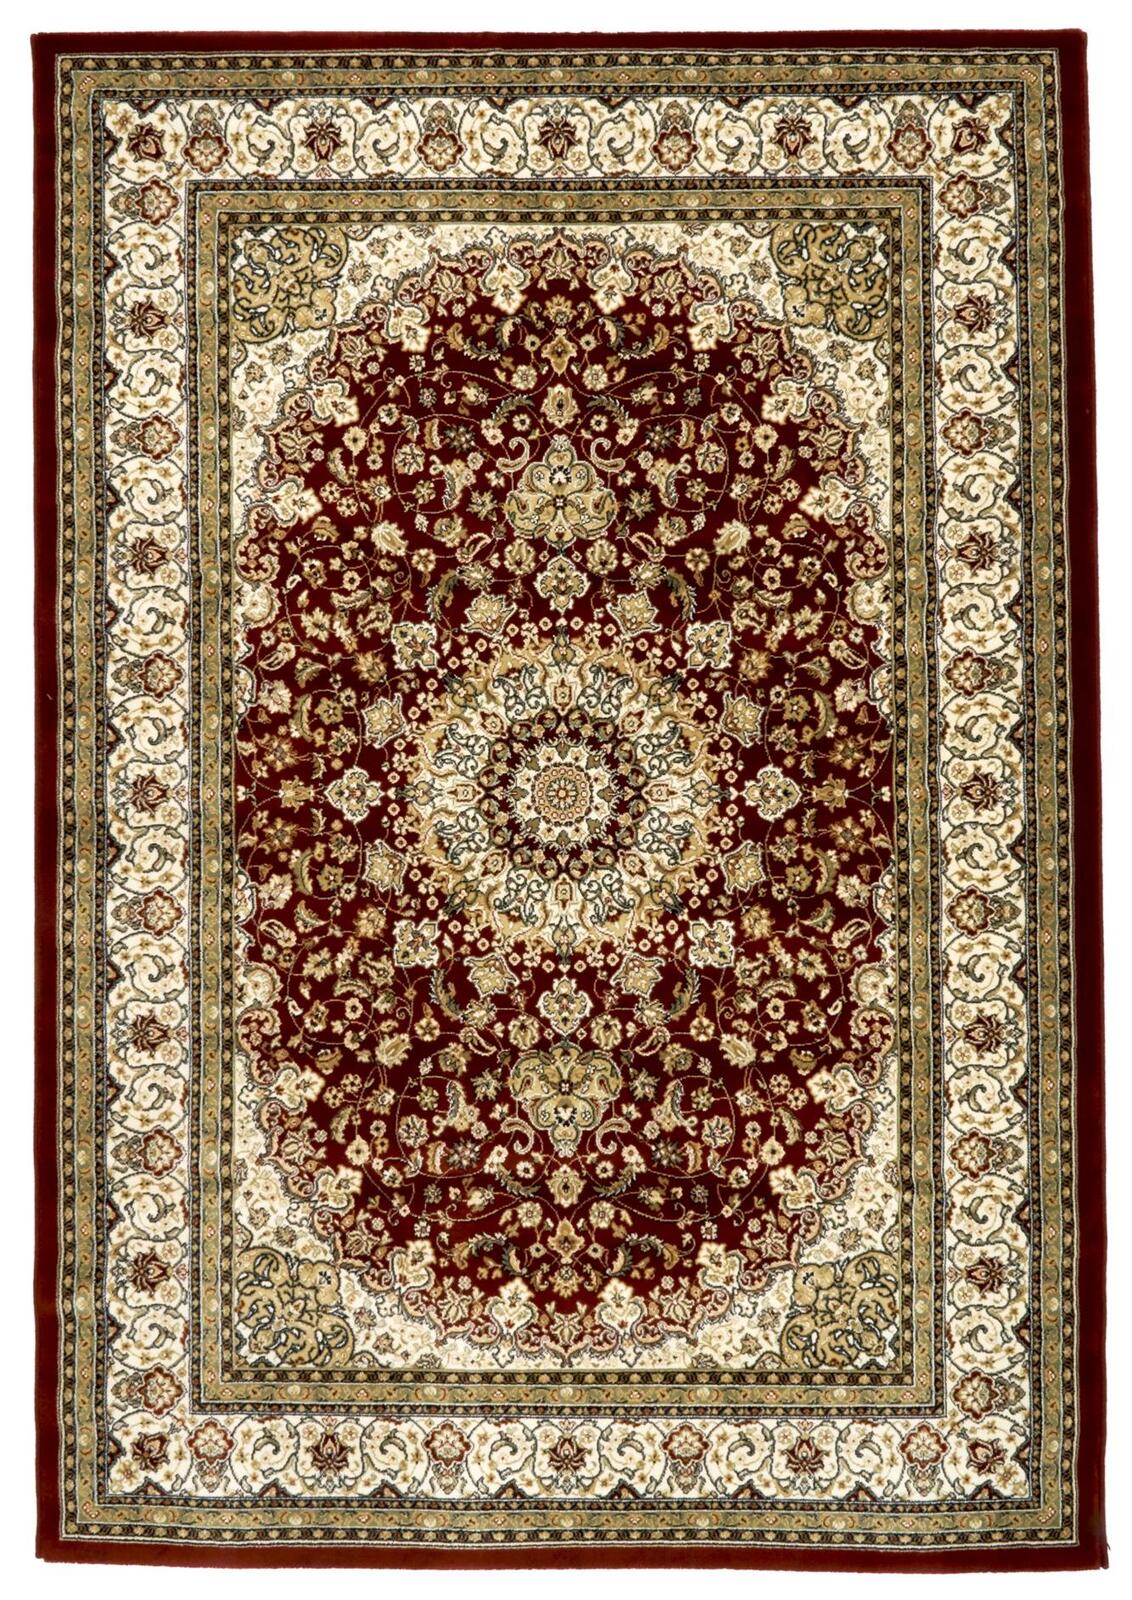 Traditional Binche Medallion Floor Rugs, Black And Red Rugs Australia